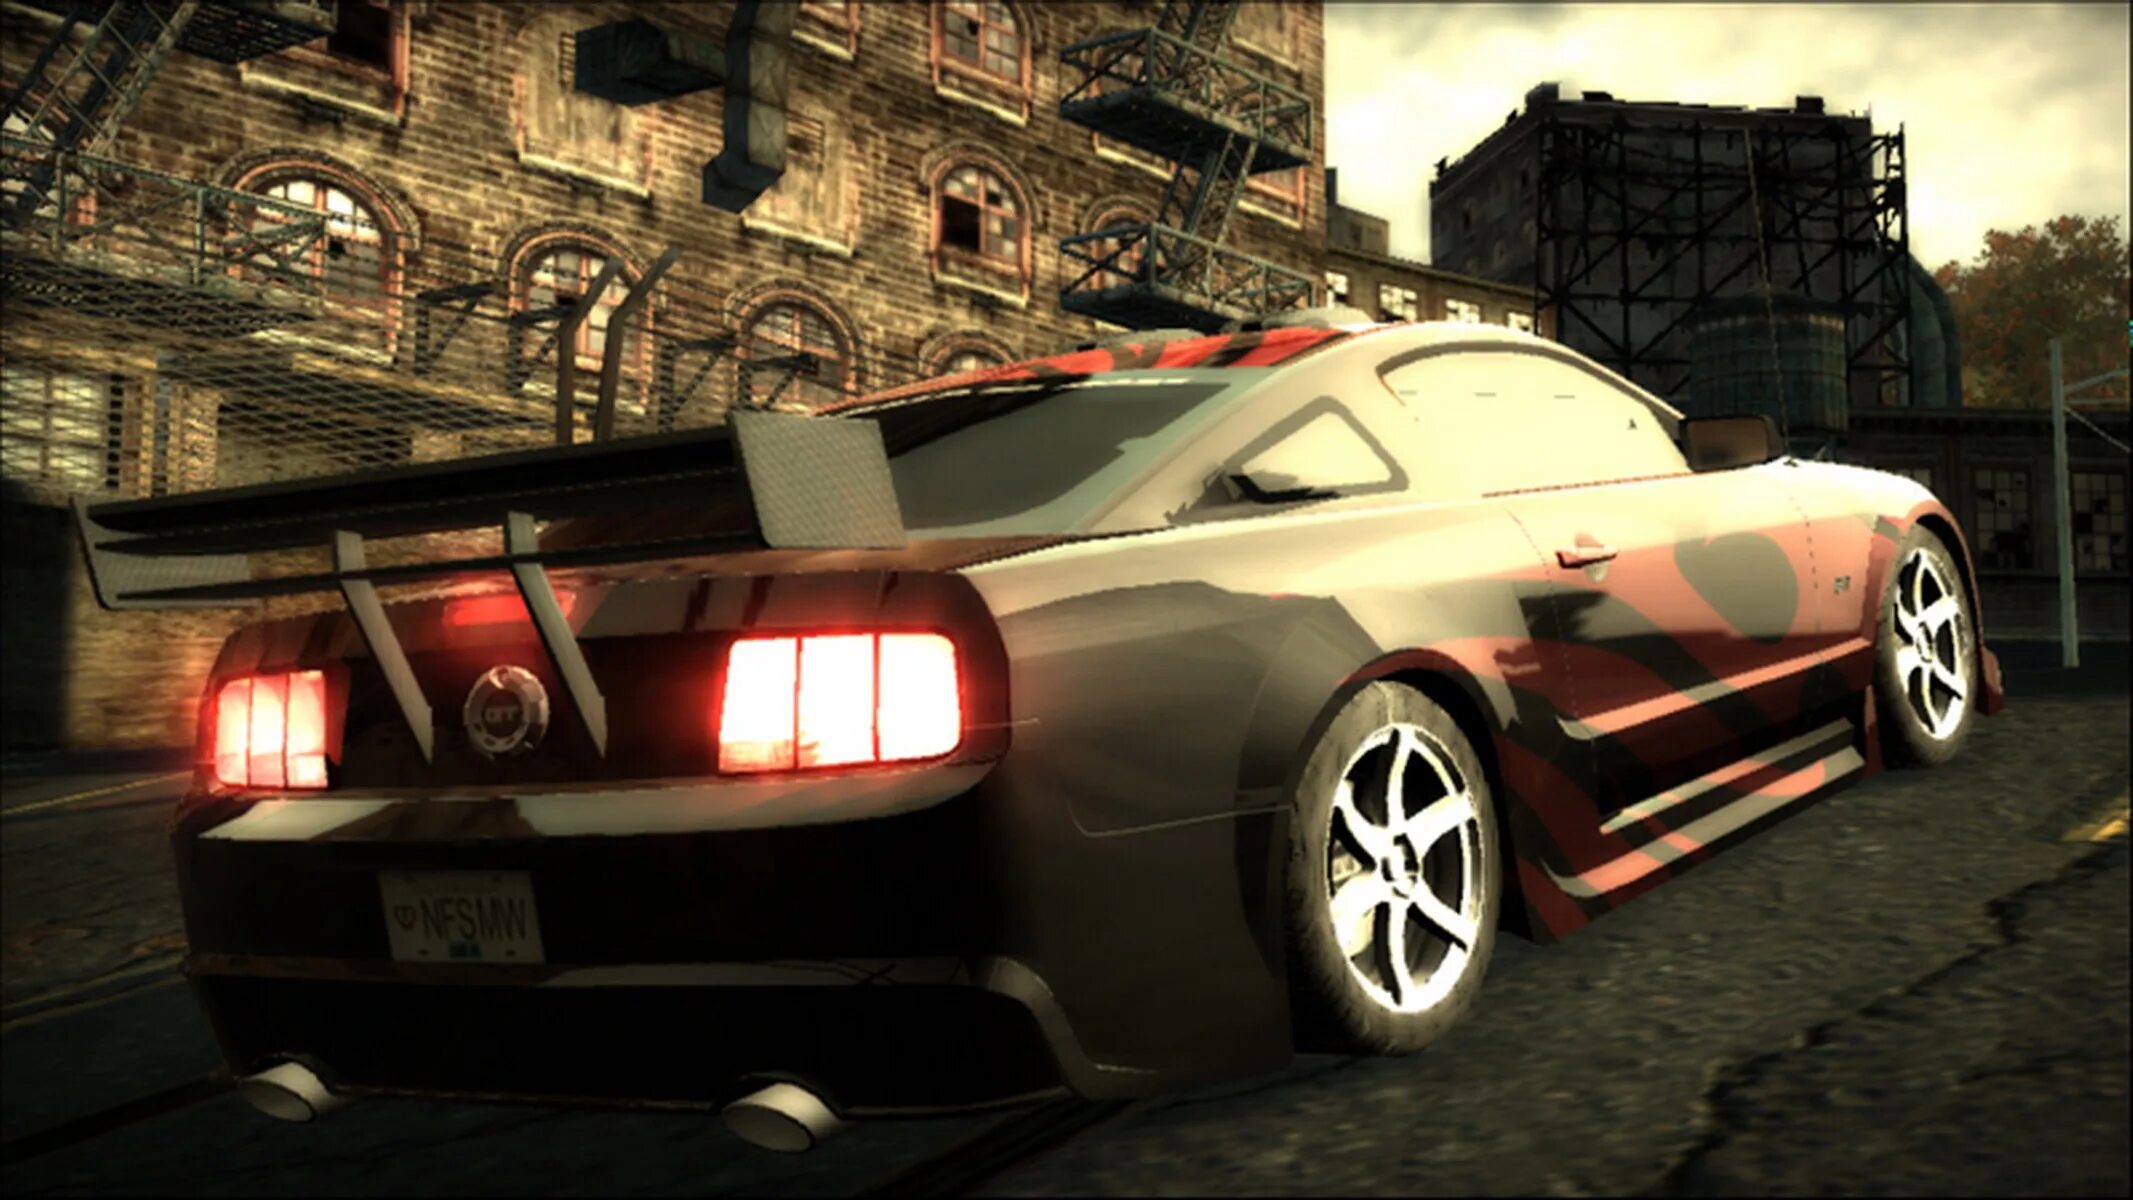 Машина рога NFS most wanted. Мустанг 2005 NFS. NFS most wanted 2005 машины. Мустанг most wanted 2005. Песни из игры мост вантед